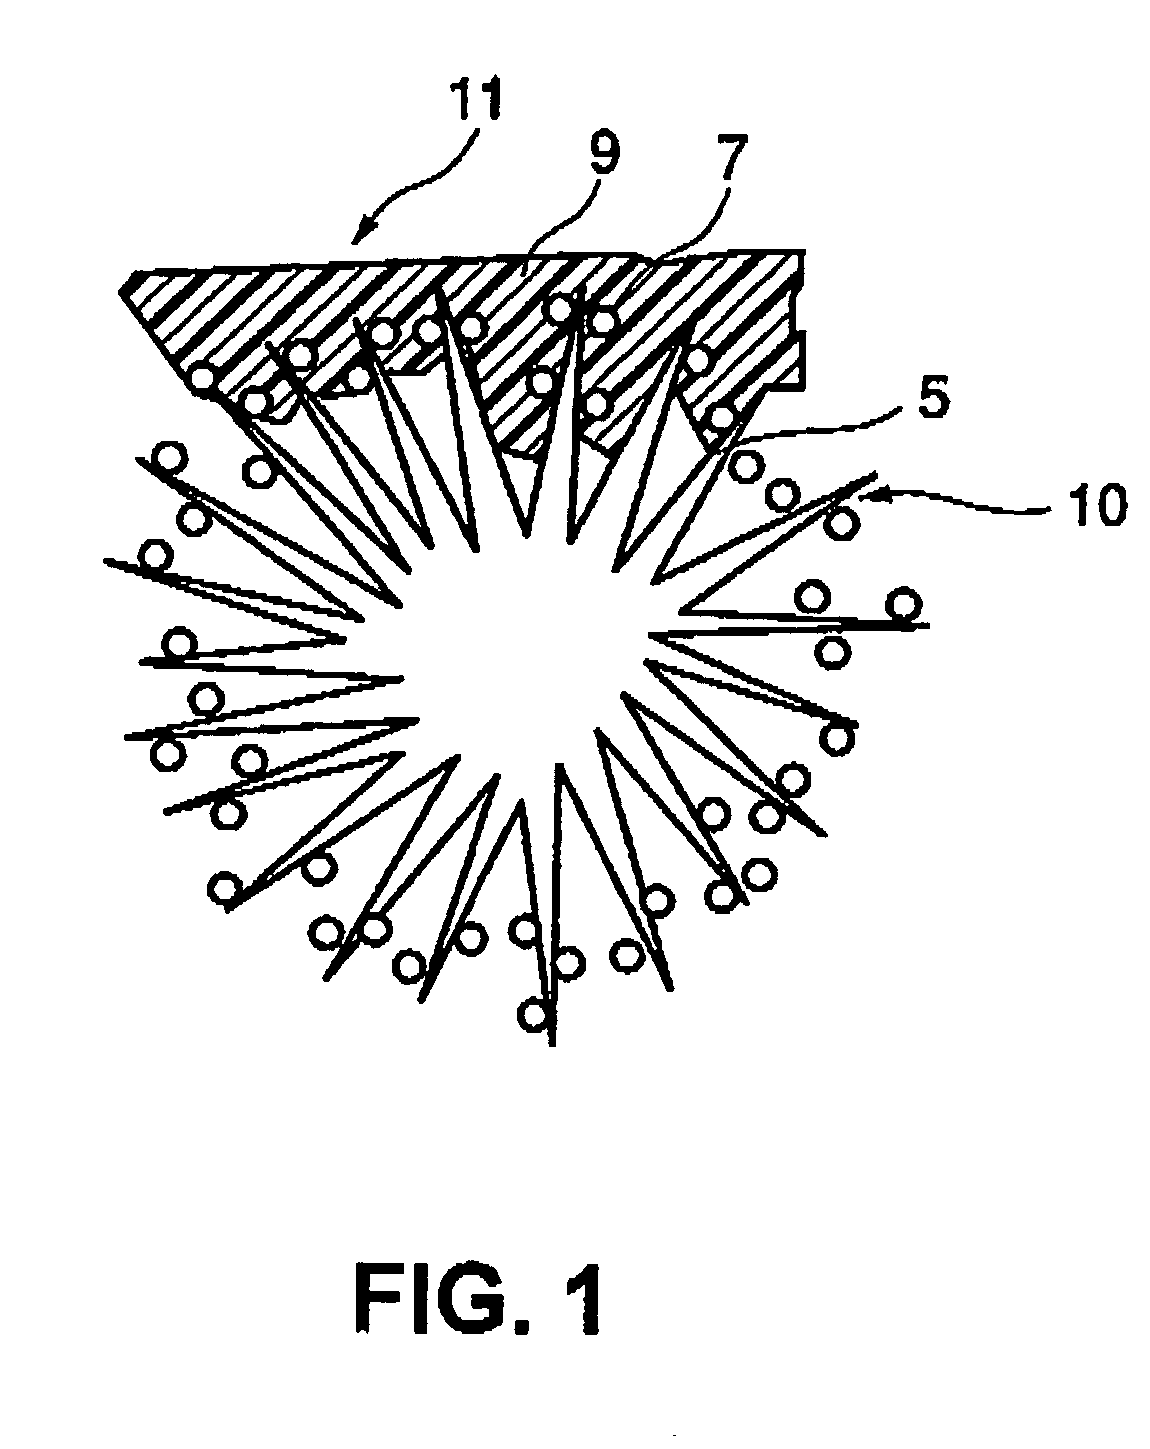 Fuel cell electrode, and fuel cell comprising the electrode